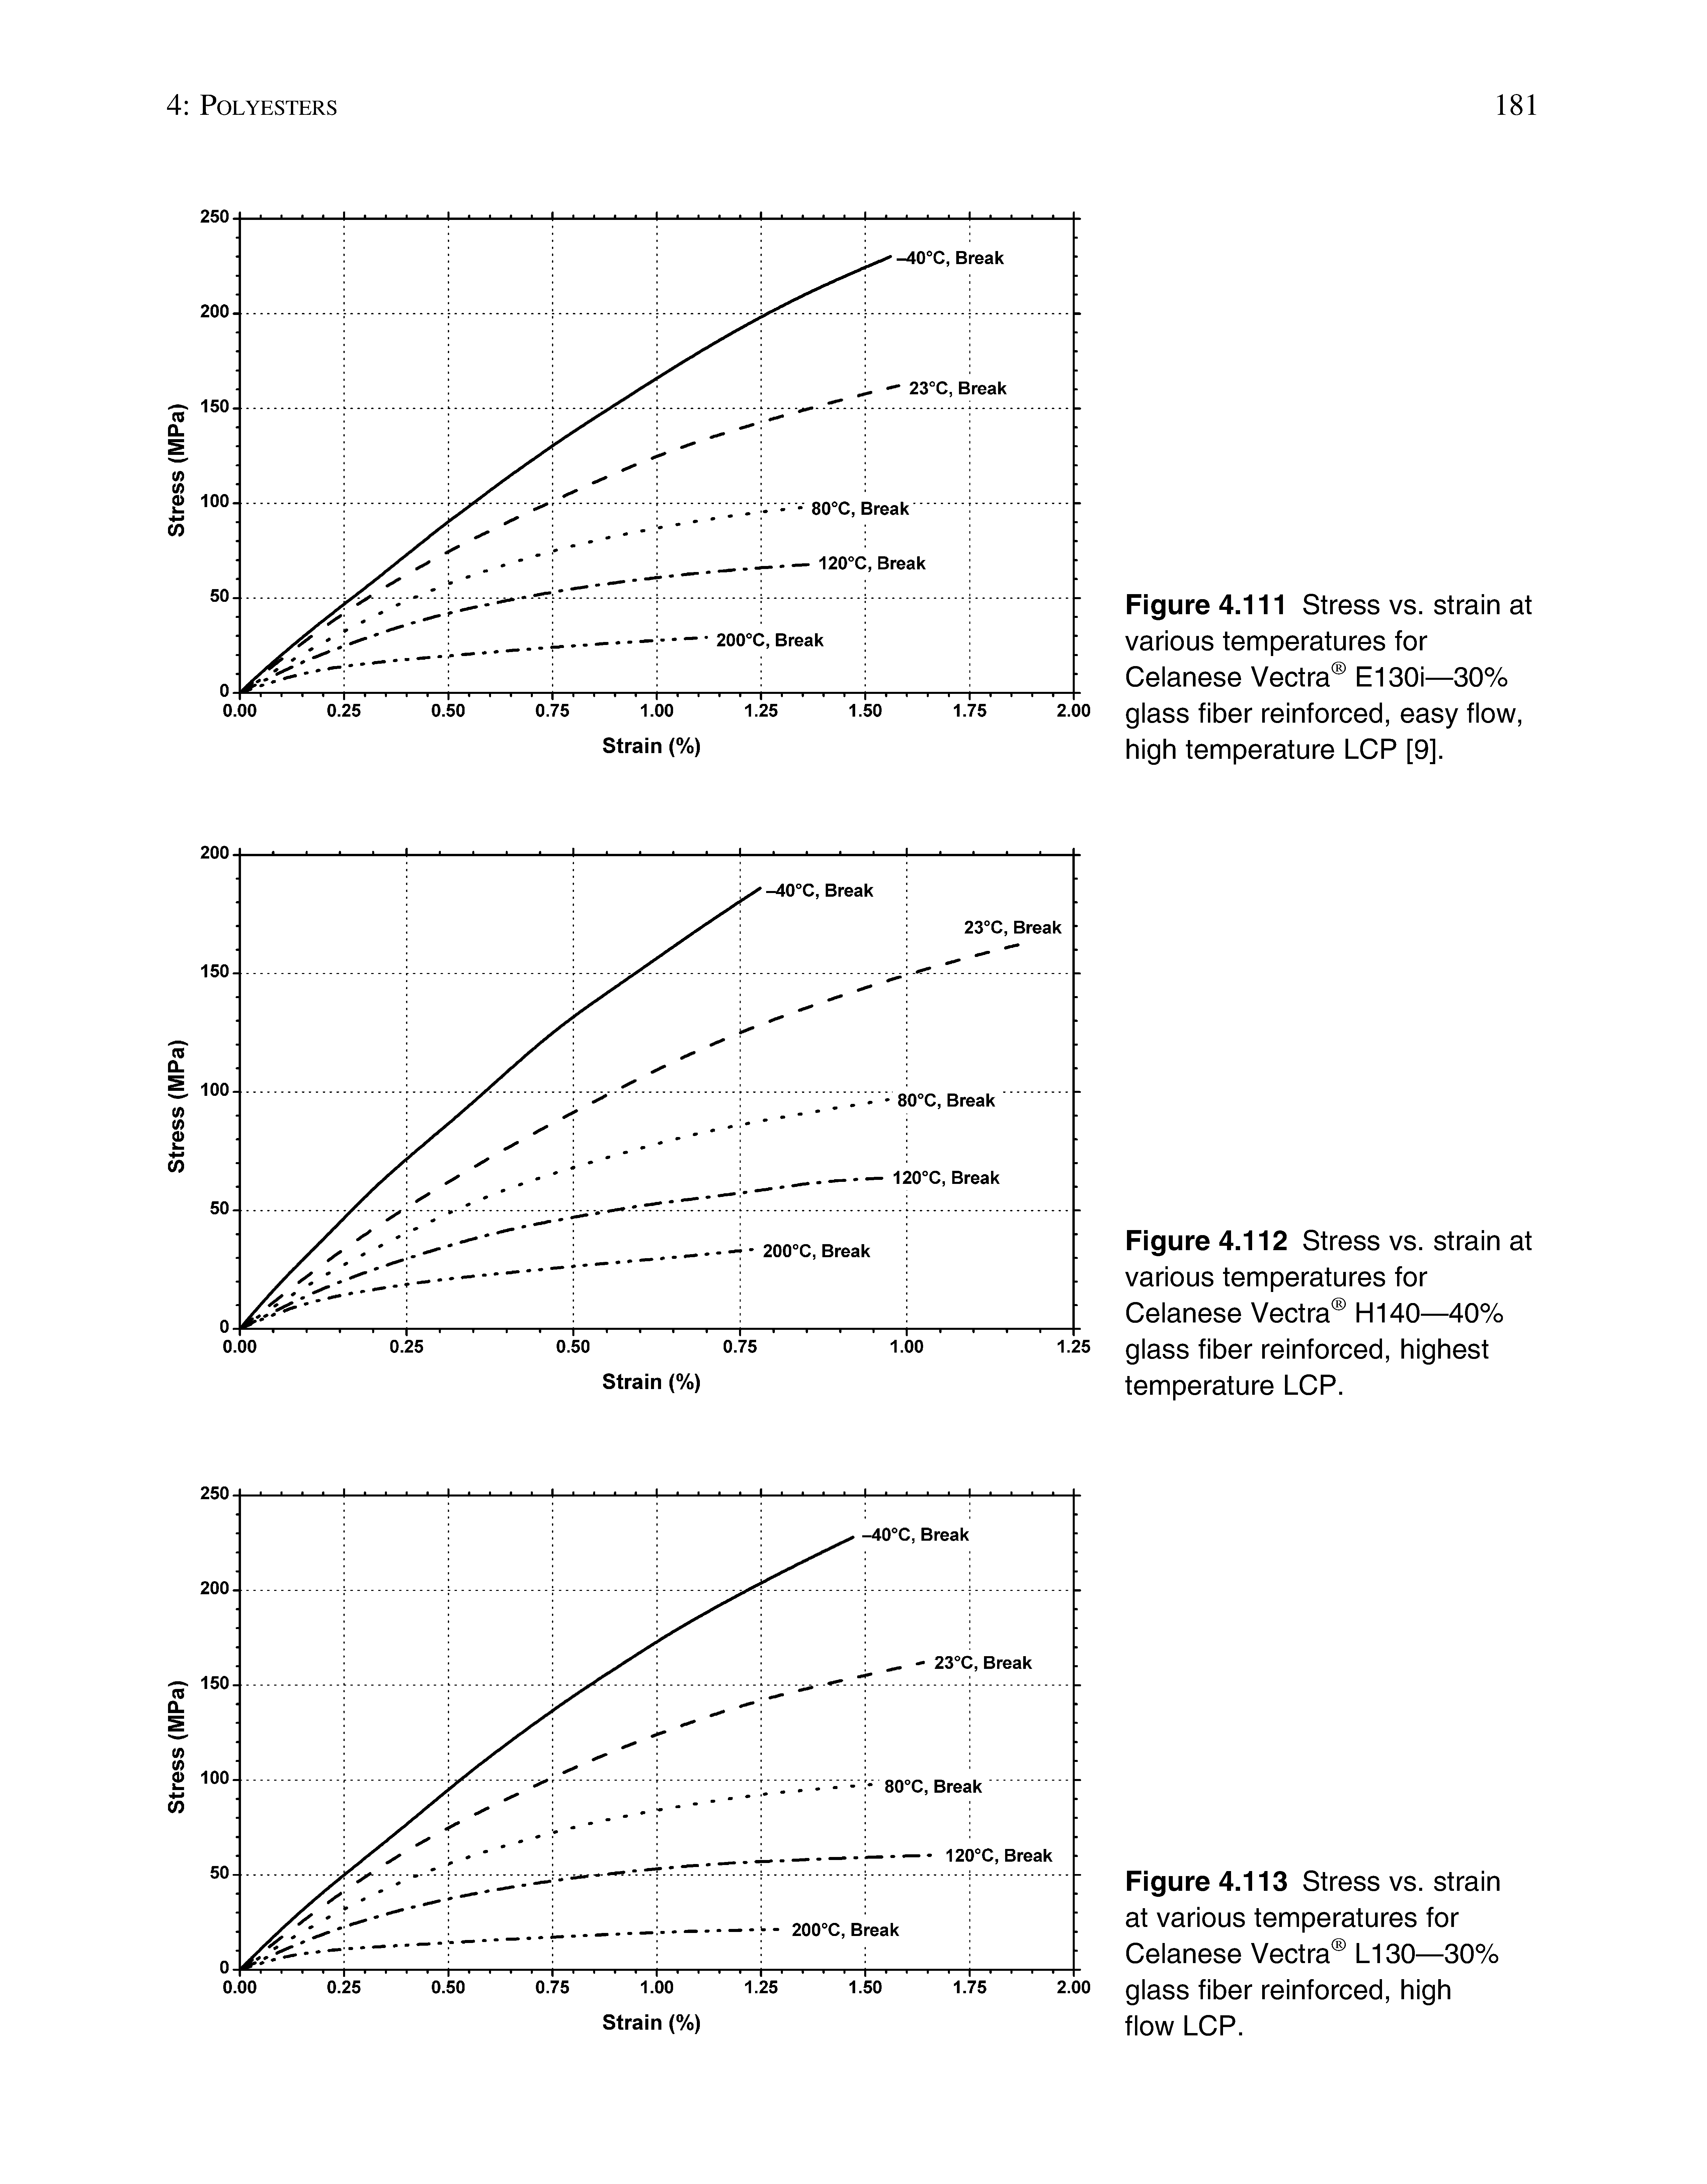 Figure 4.111 Stress vs. strain at various temperatures for Celanese Vectra E130i—30% glass fiber reinforced, easy flow, high temperature LCP [9],...